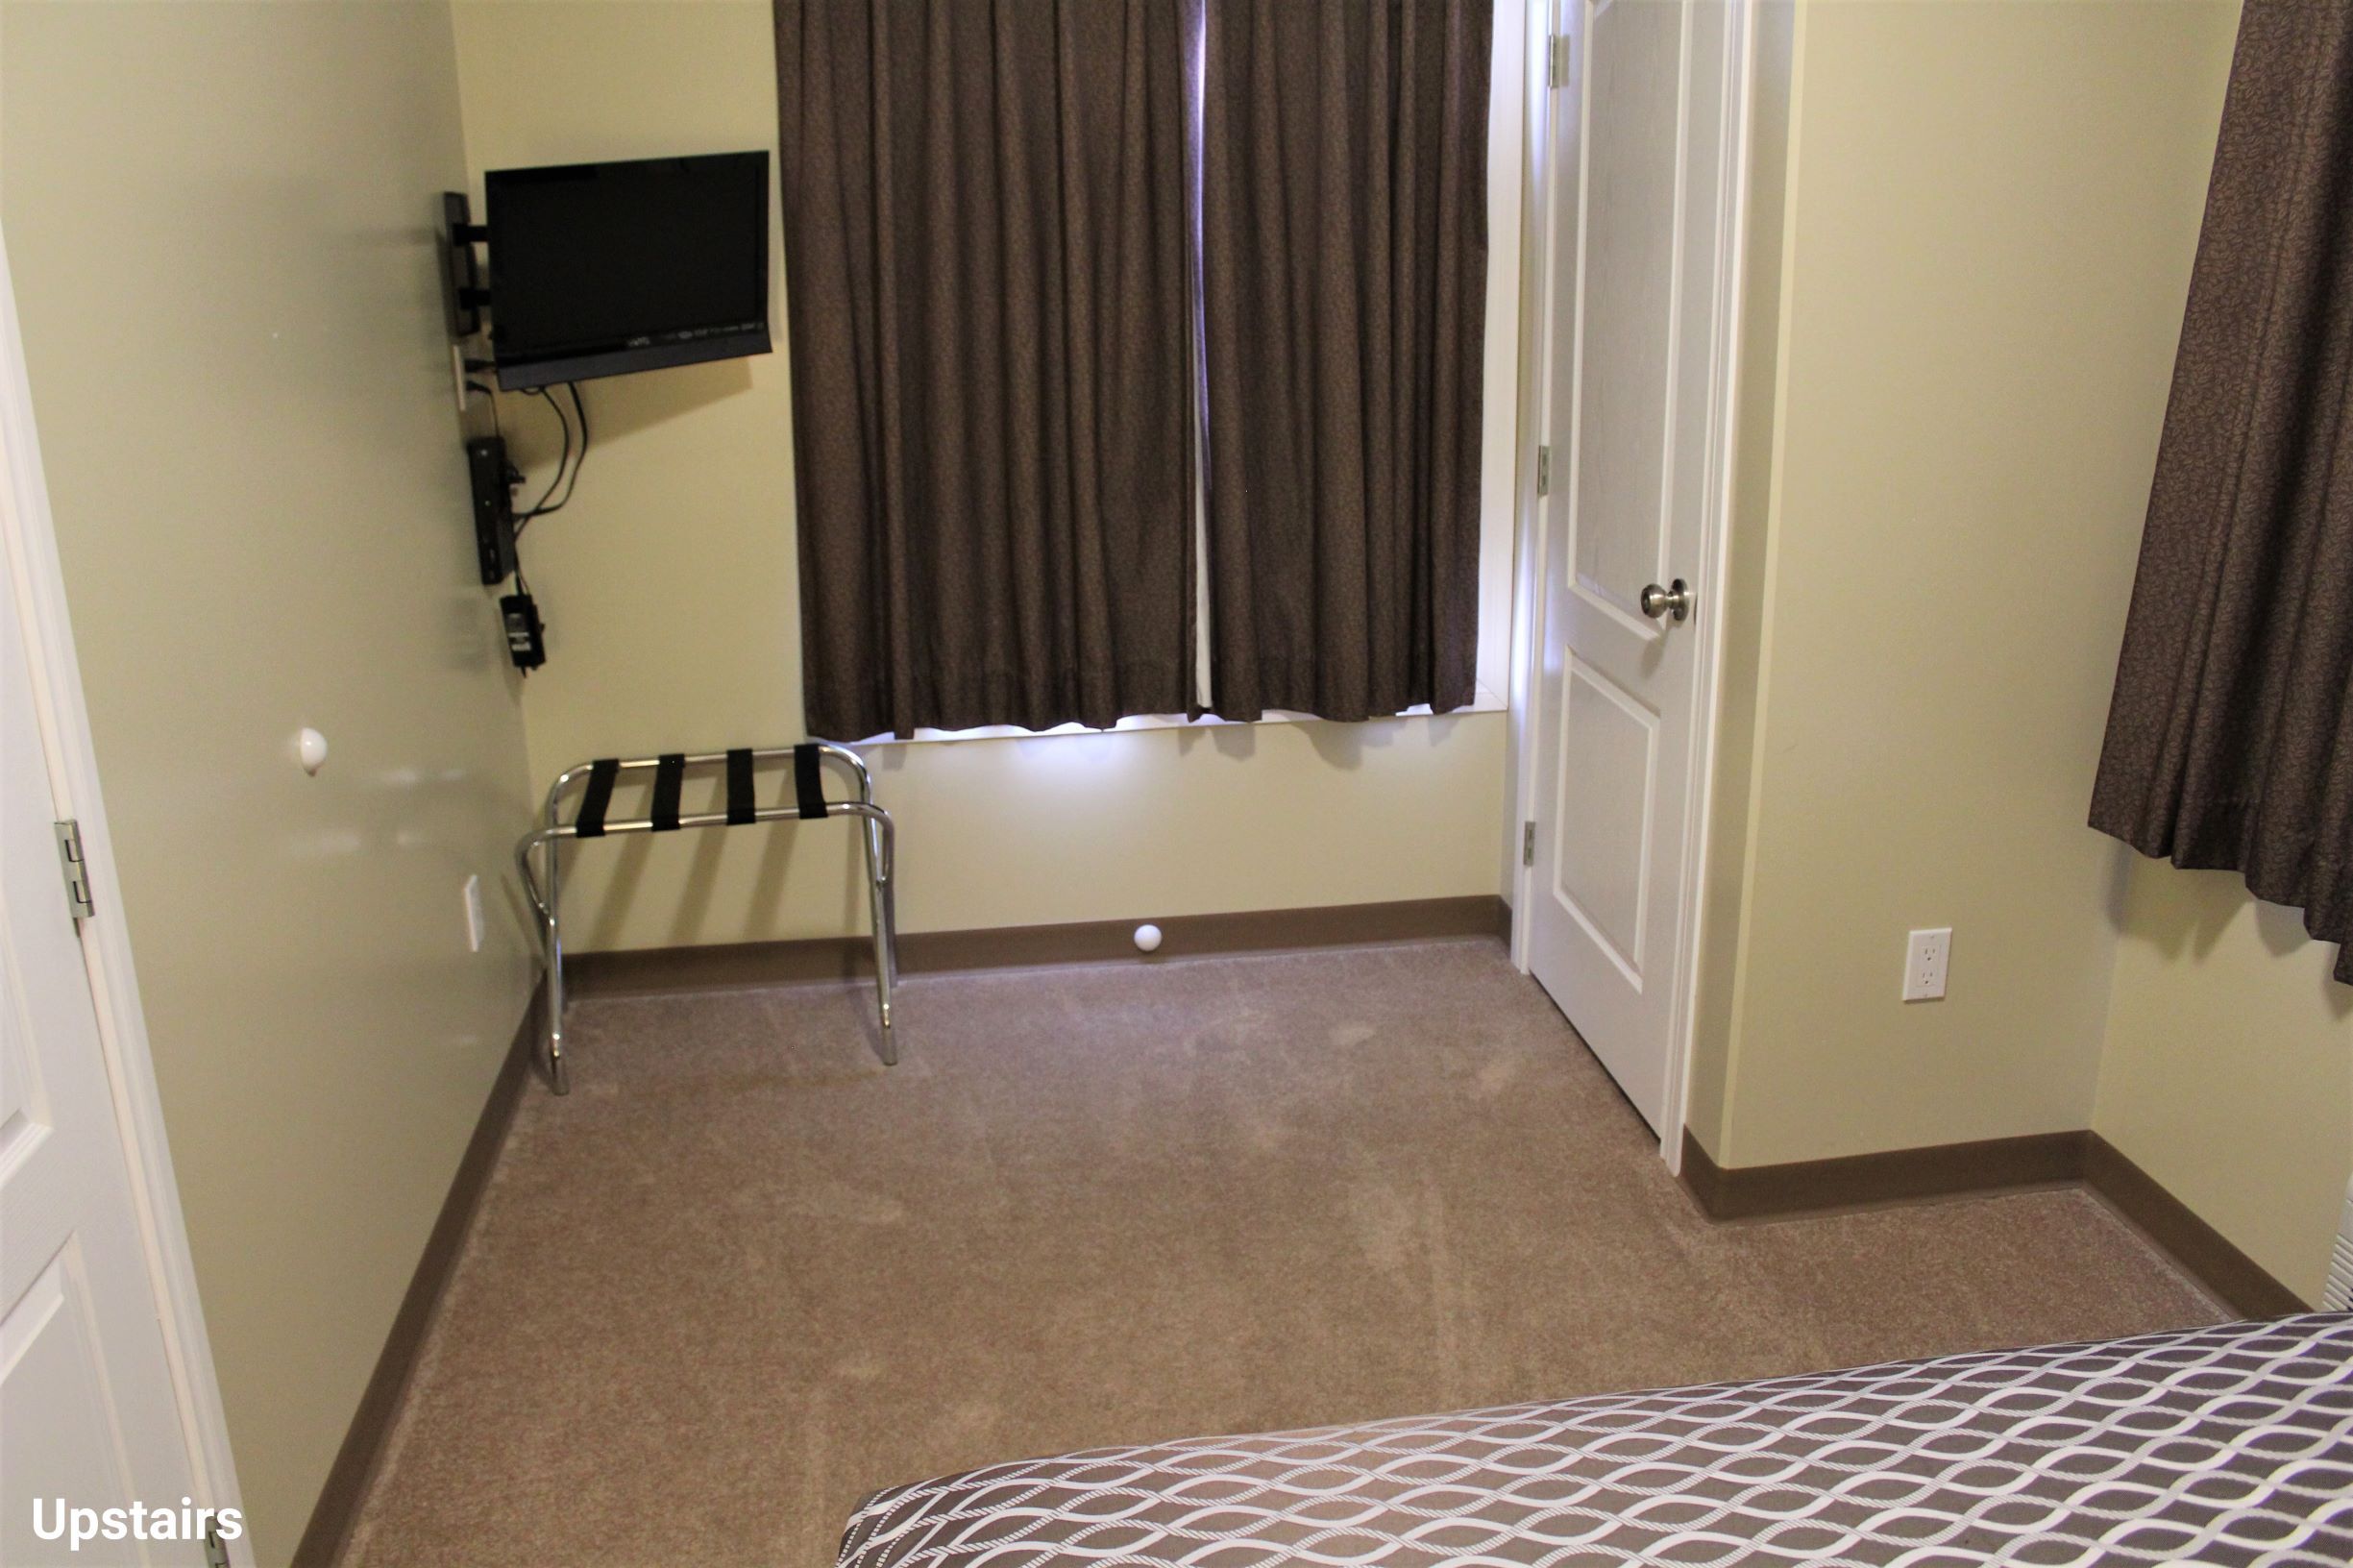 2 BEDROOM EXECUTIVE SUITE - 2 Bedrooms w/ 1 Queen Bed Per Room plus Queen Size pull-out couch in the Living Room (on LaCreteInn&Suites.ca)